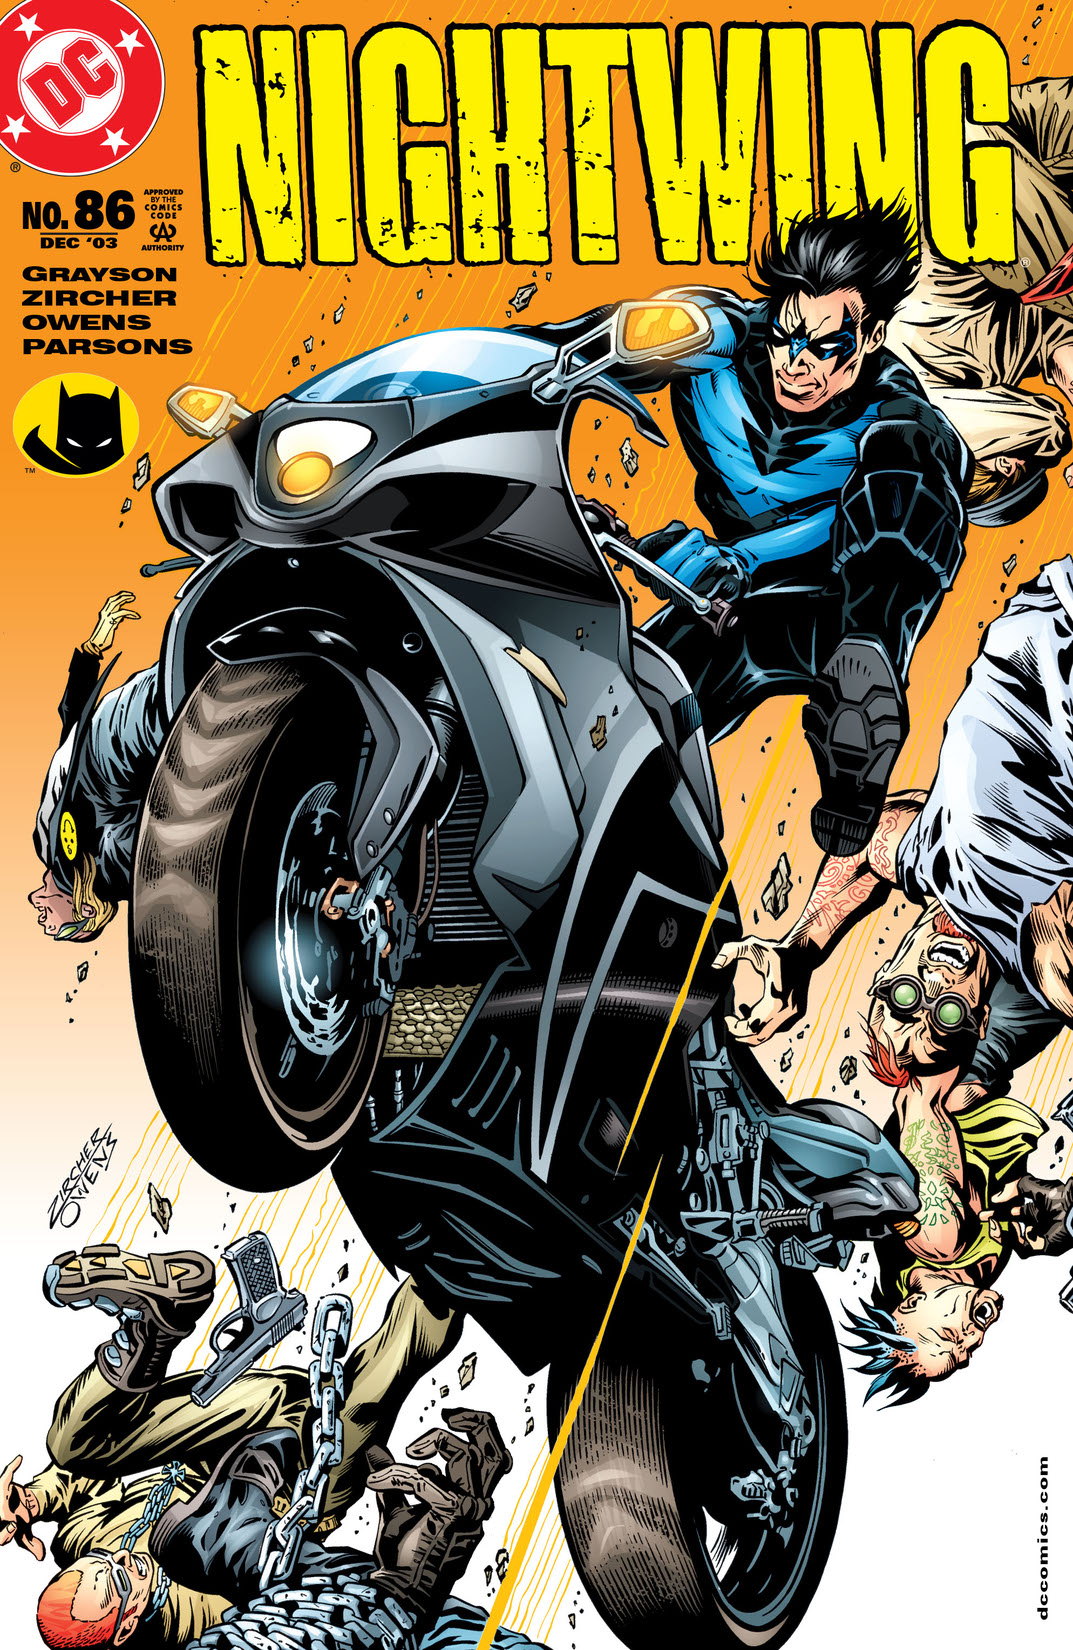 Nightwing (1996-) #86 preview images